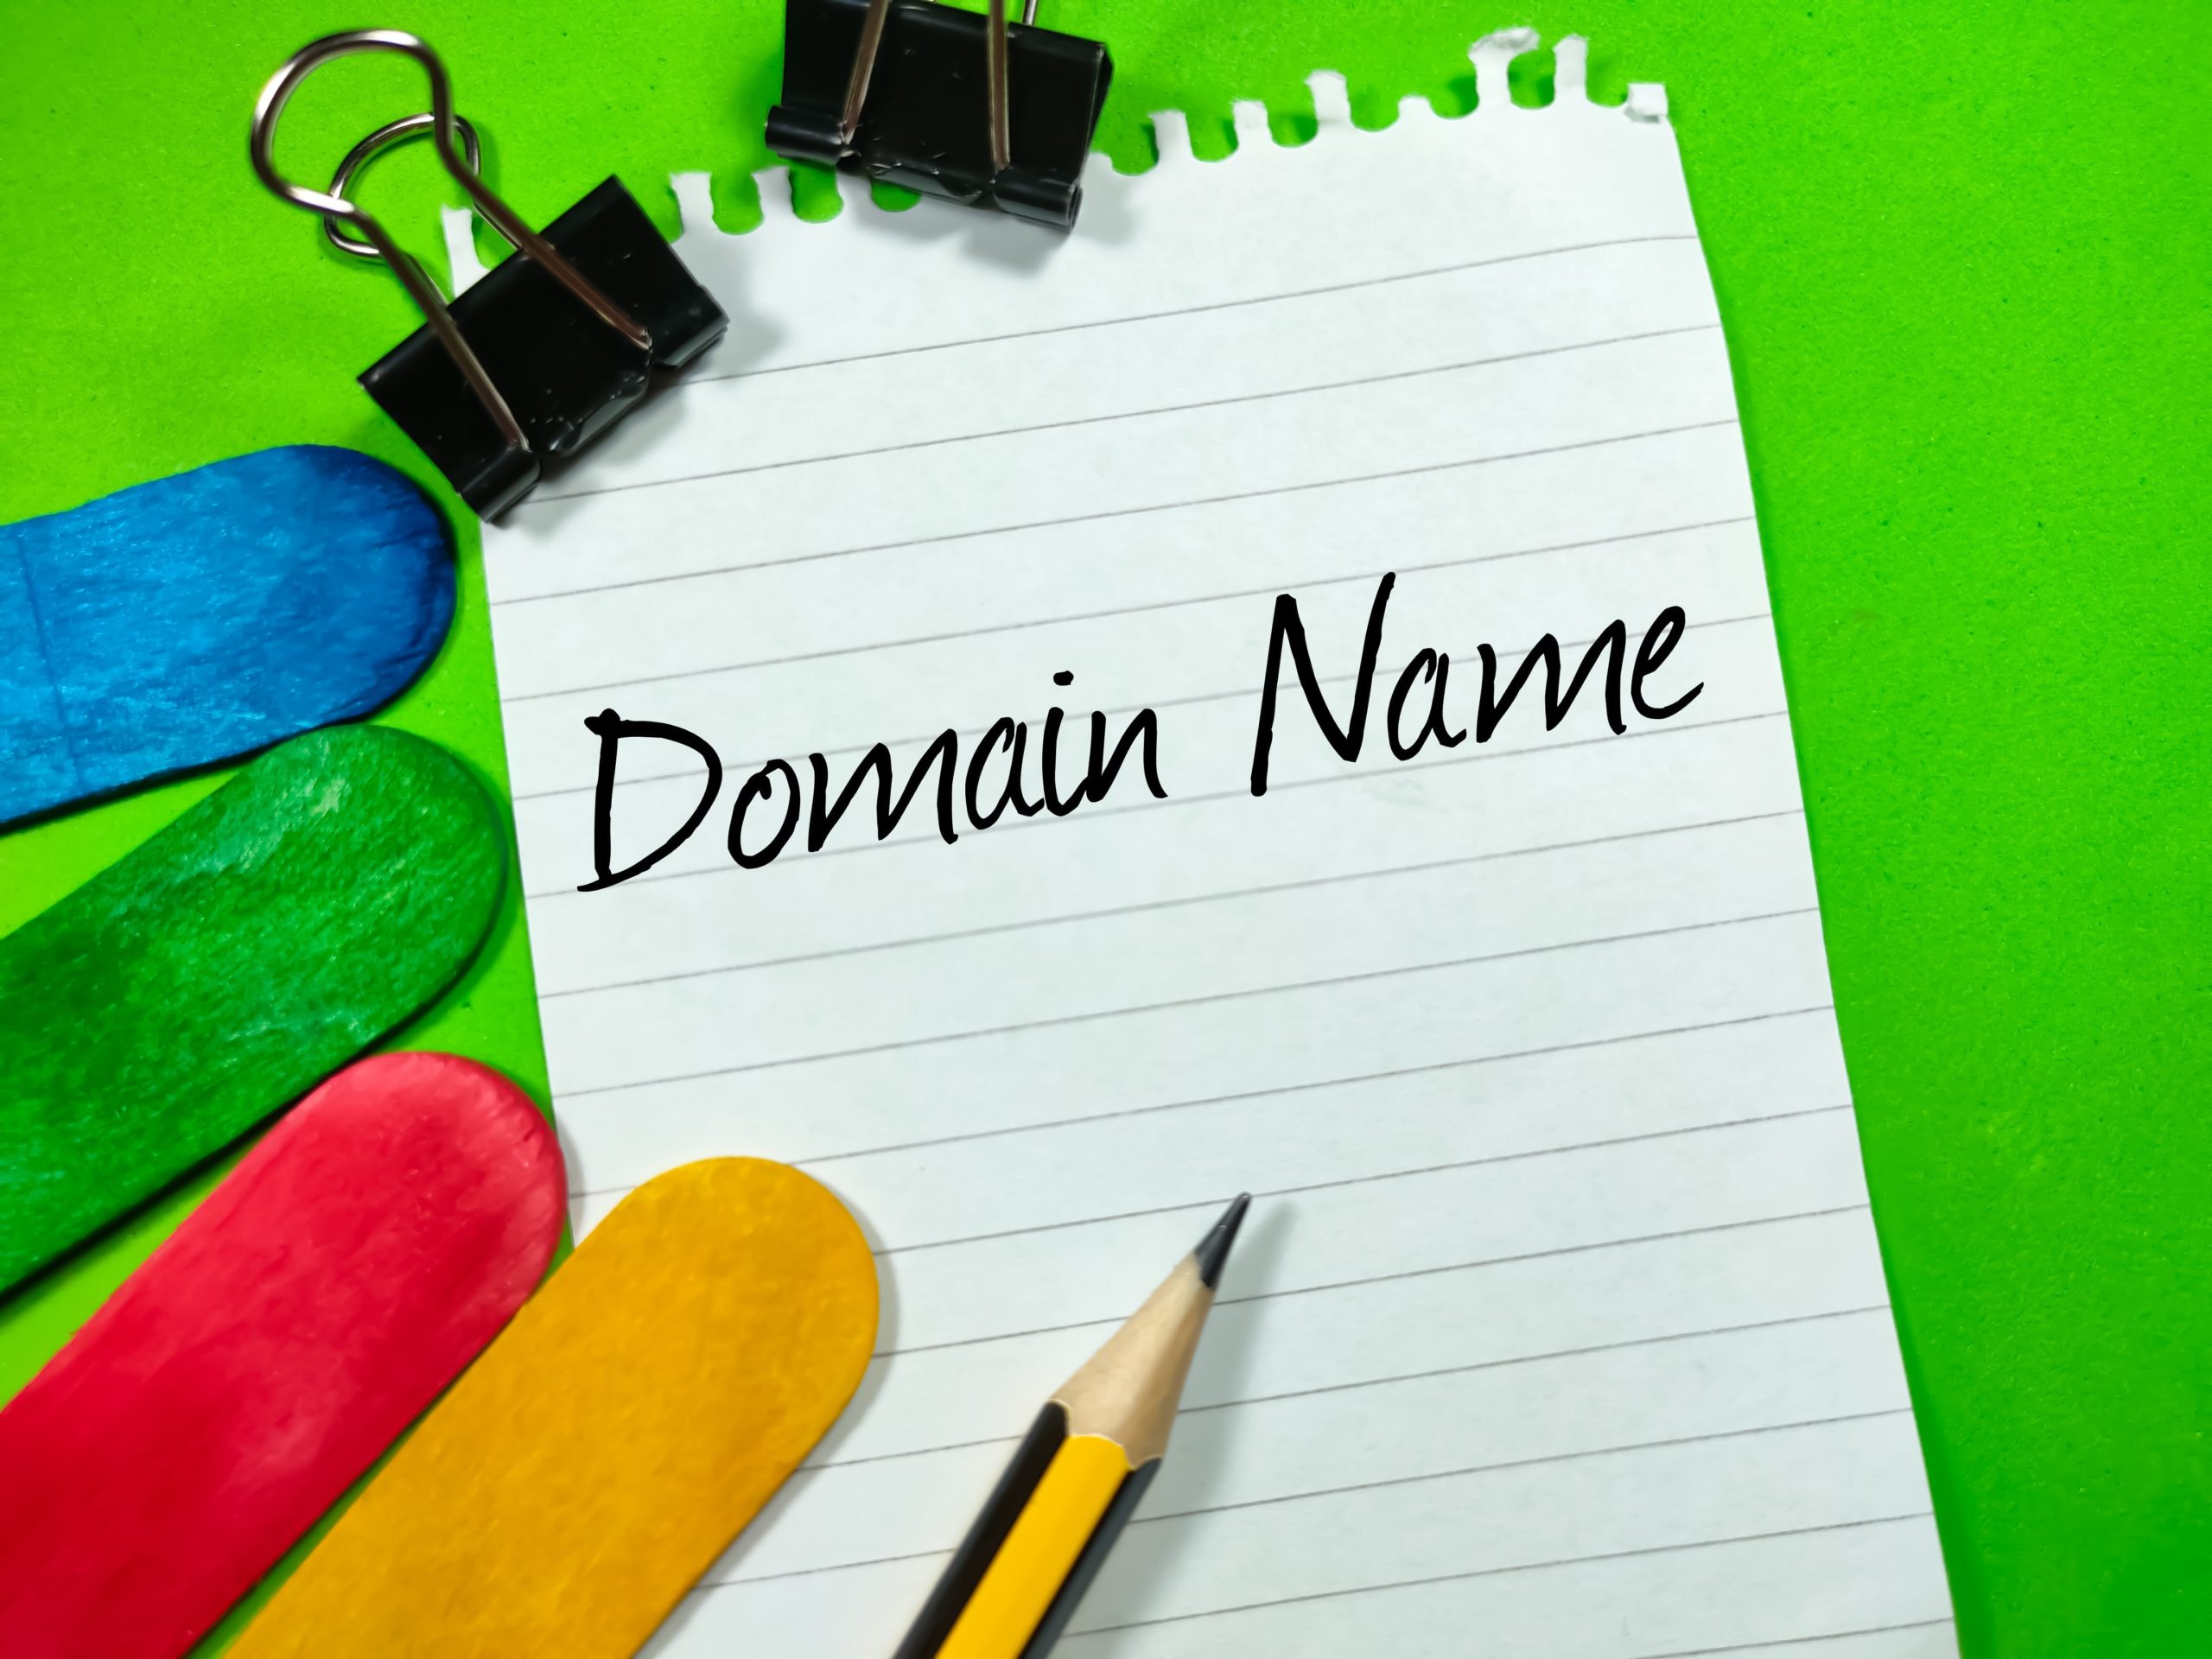 Domain Name for Your Business